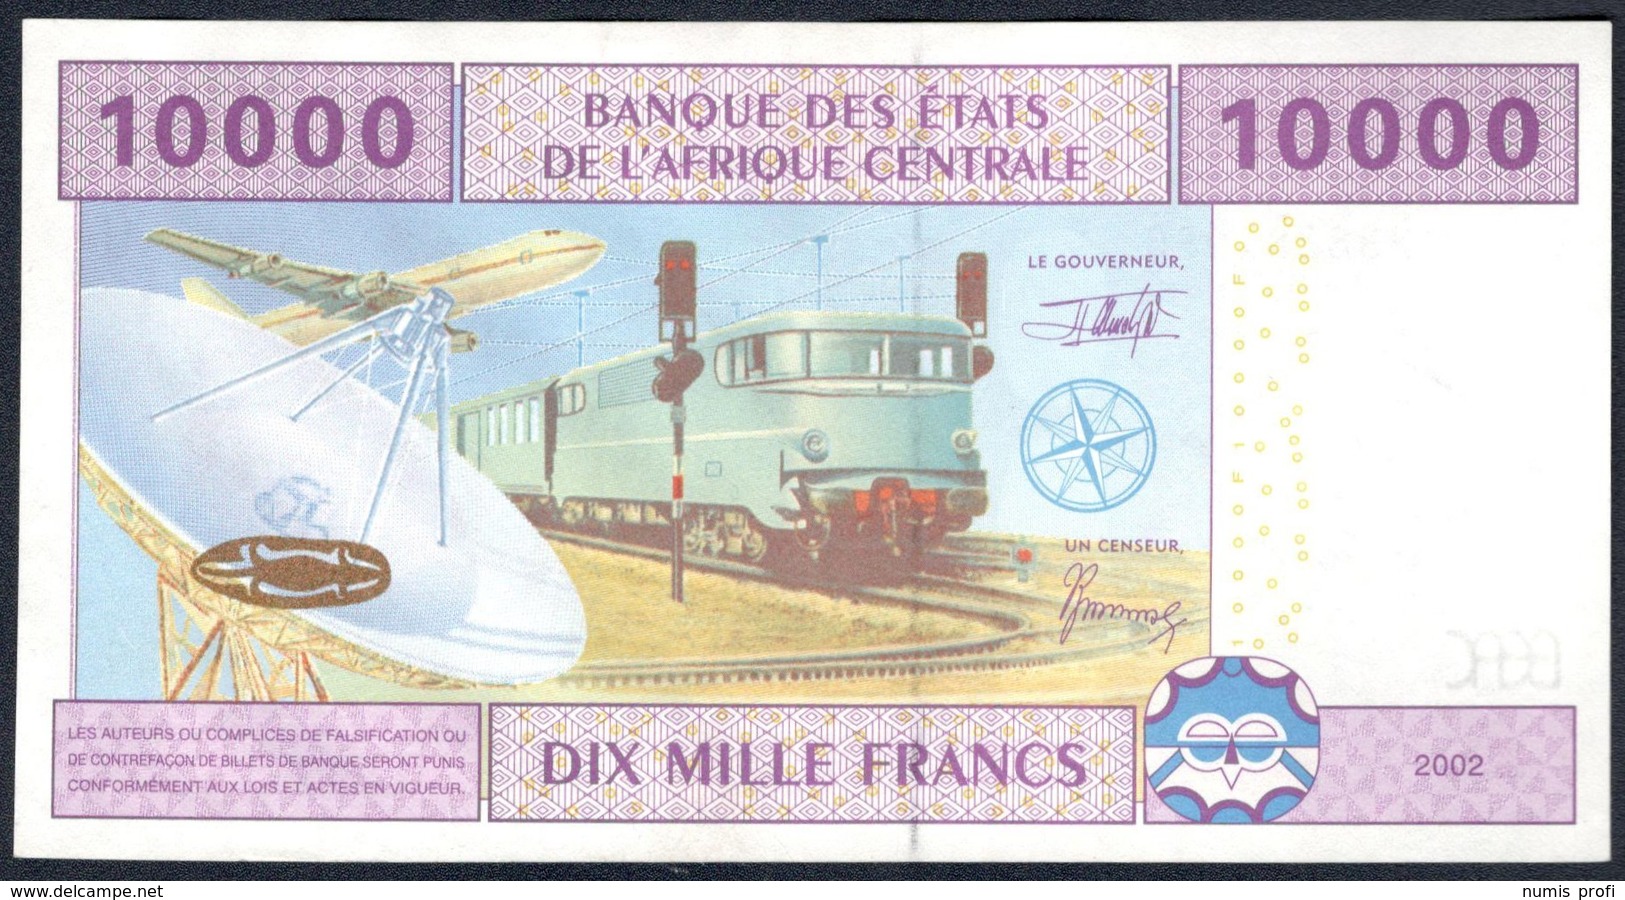 Central African States - Cameroon - 10000 Francs 2002 - P210Ub - Stati Centrafricani